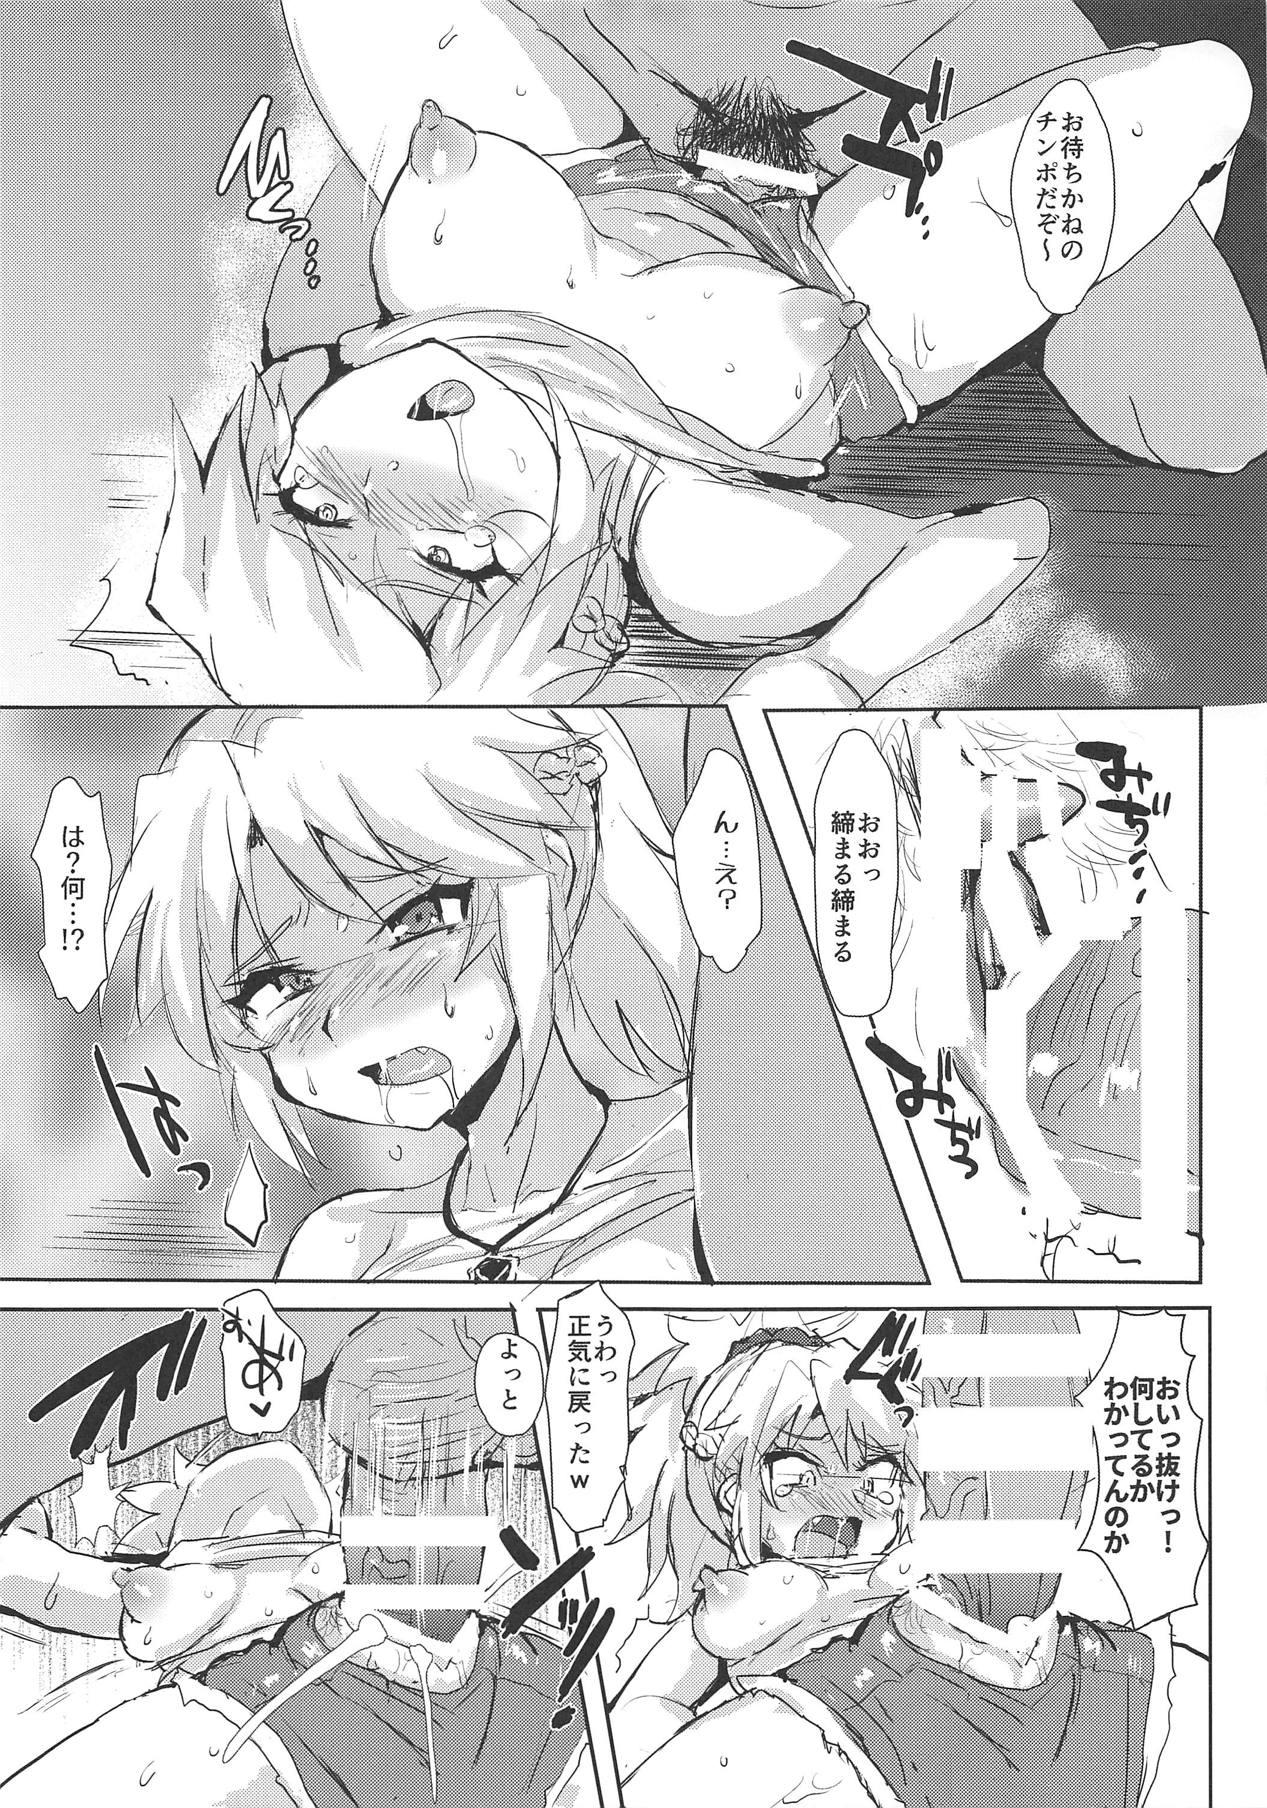 Chile Mordred Kyousei Renzoku Zecchou - Fate grand order Horny Slut - Page 12